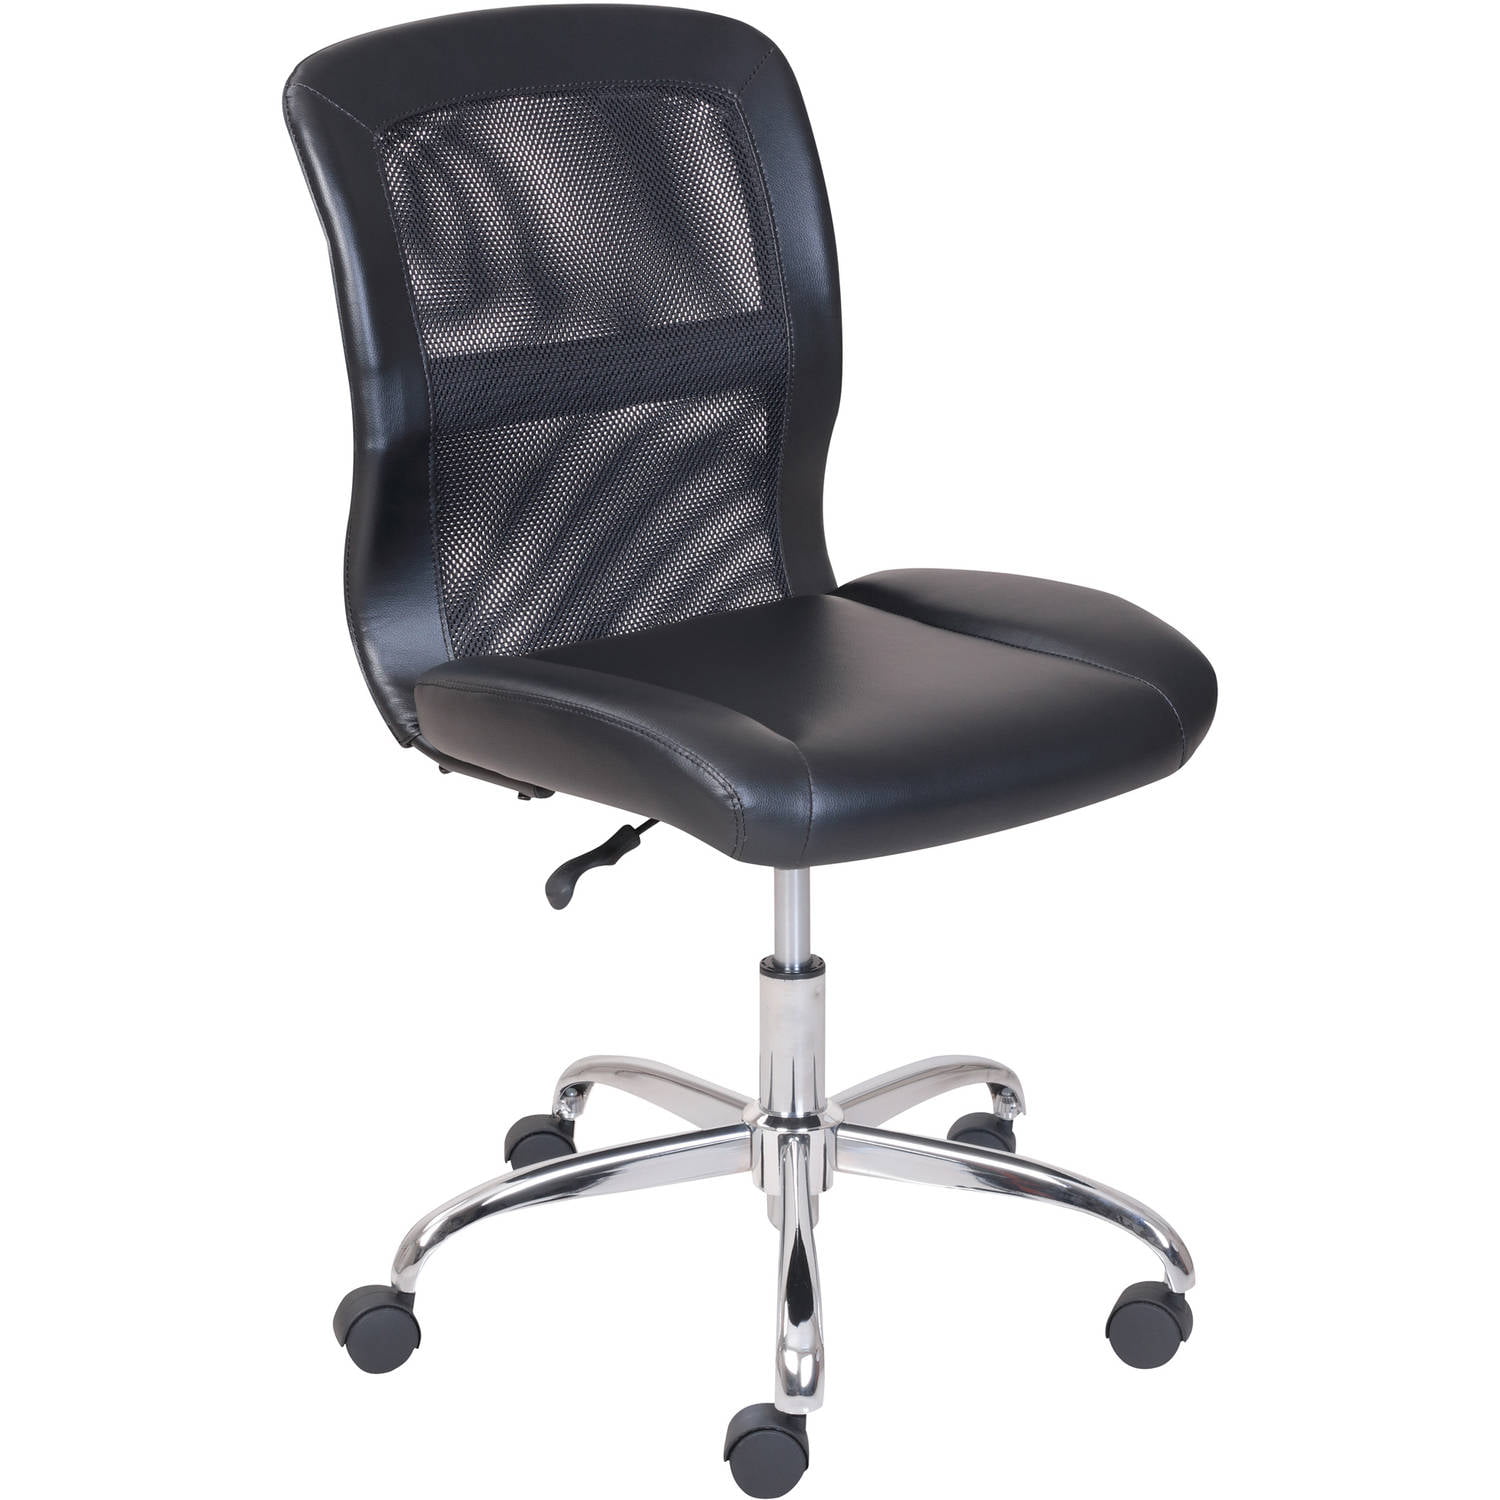 Featured image of post Small Desk Chair Walmart / Our desk chairs are made with ergonomic comfort in mind to make every workday easier.